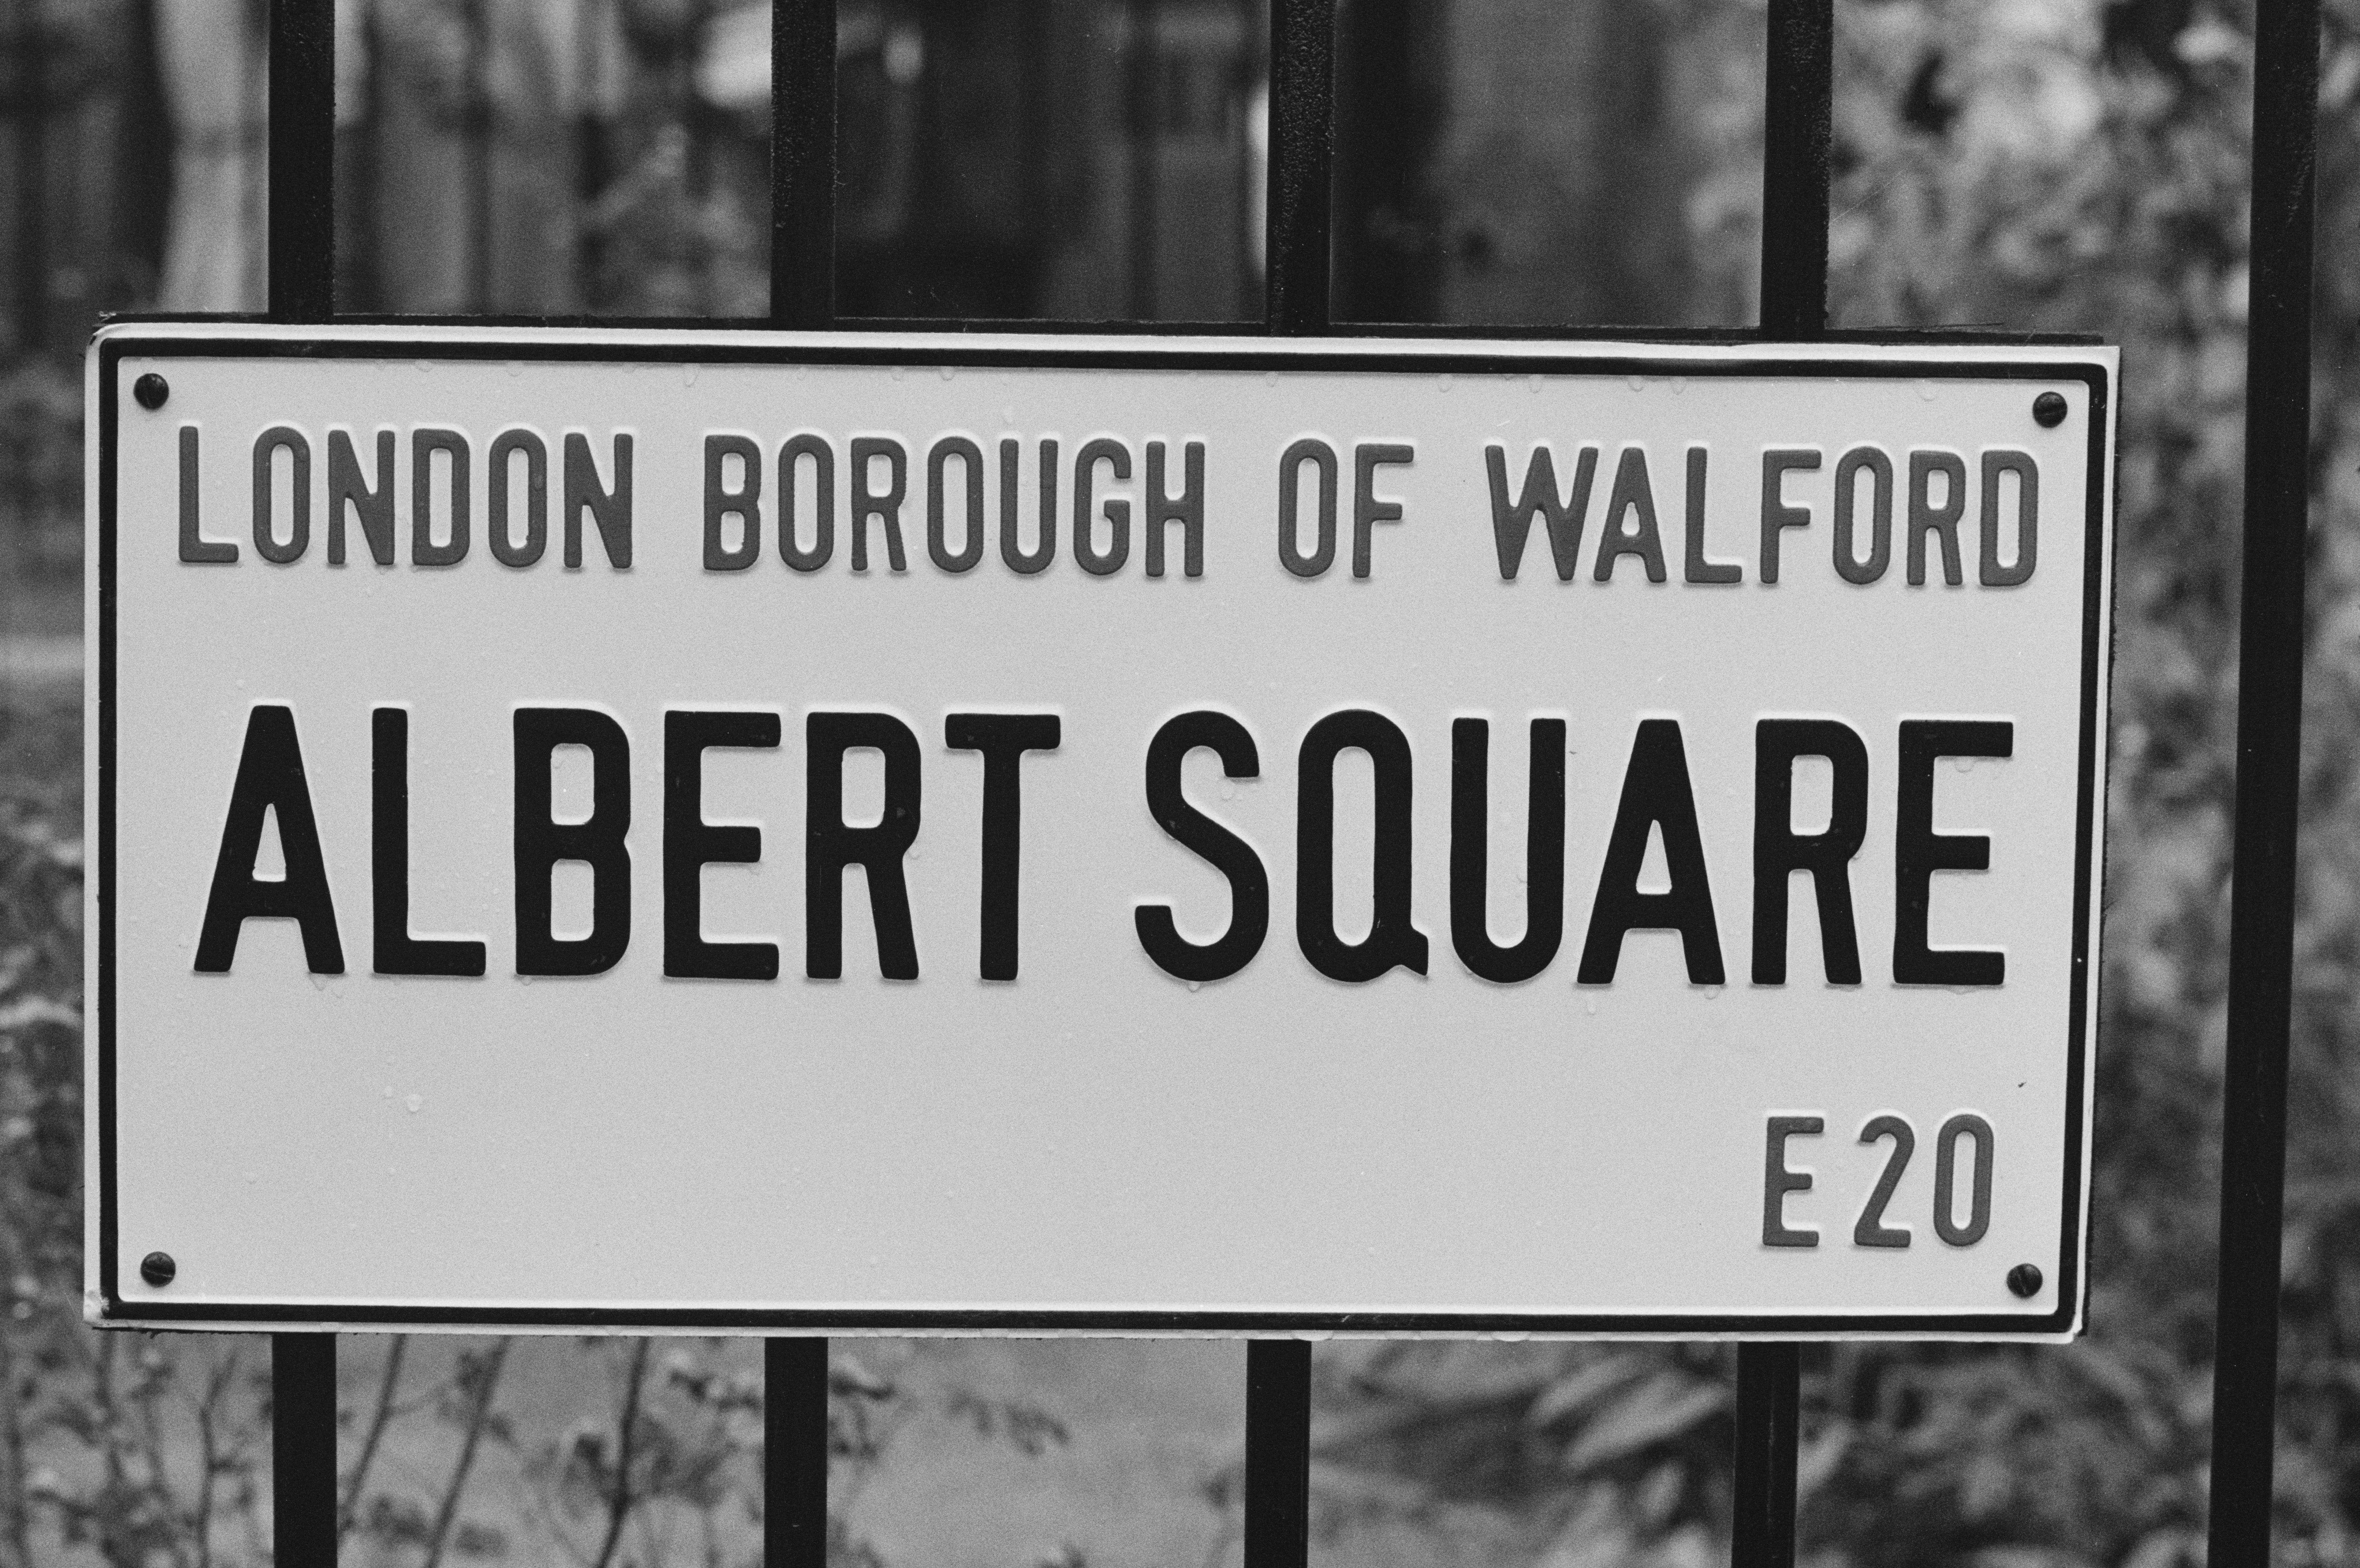 Albert Square will continue to be home to EastEnders following the sale